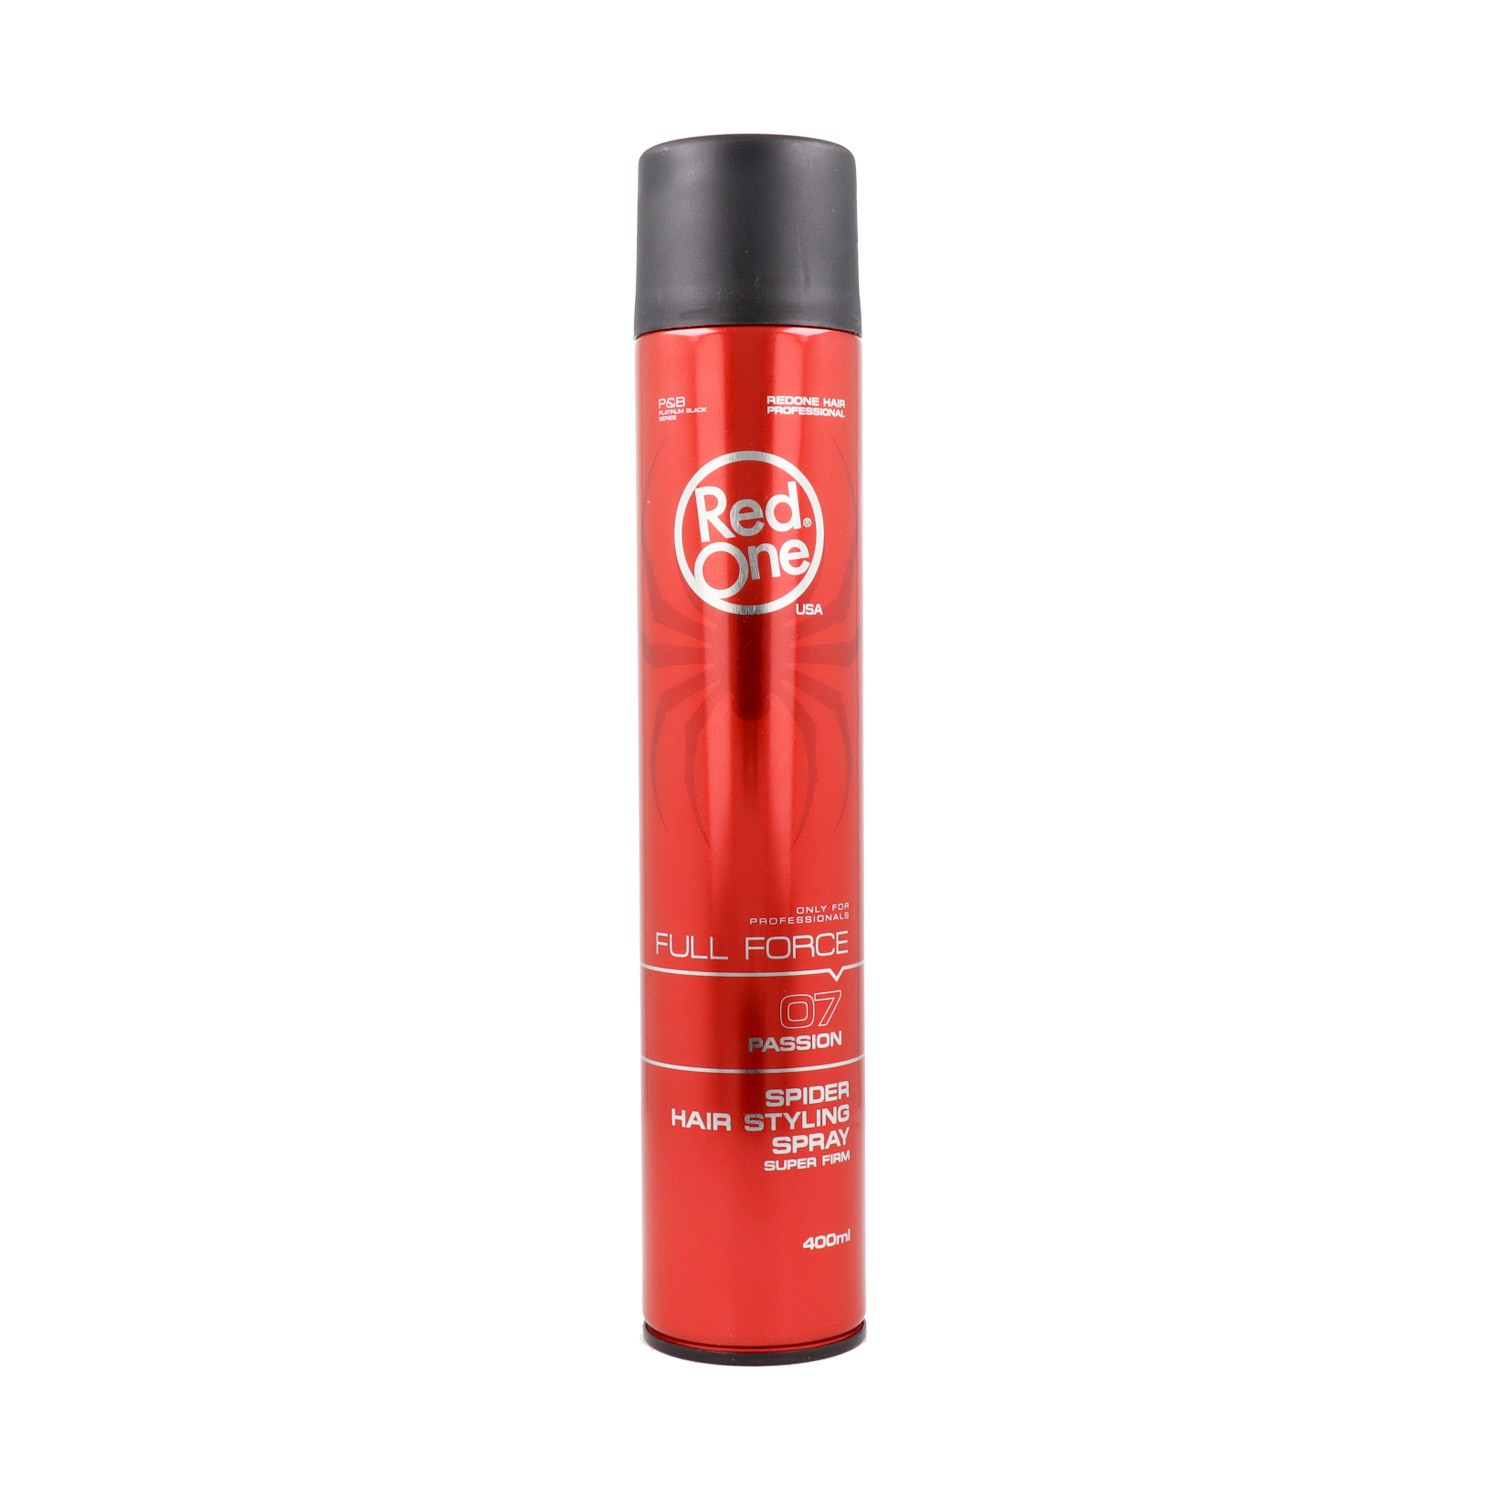 Red One - Red one hair styling spray full force passion 400 ml, laca full force passion. Belleza y cuidado de tu cabello y tu piel con Red One.